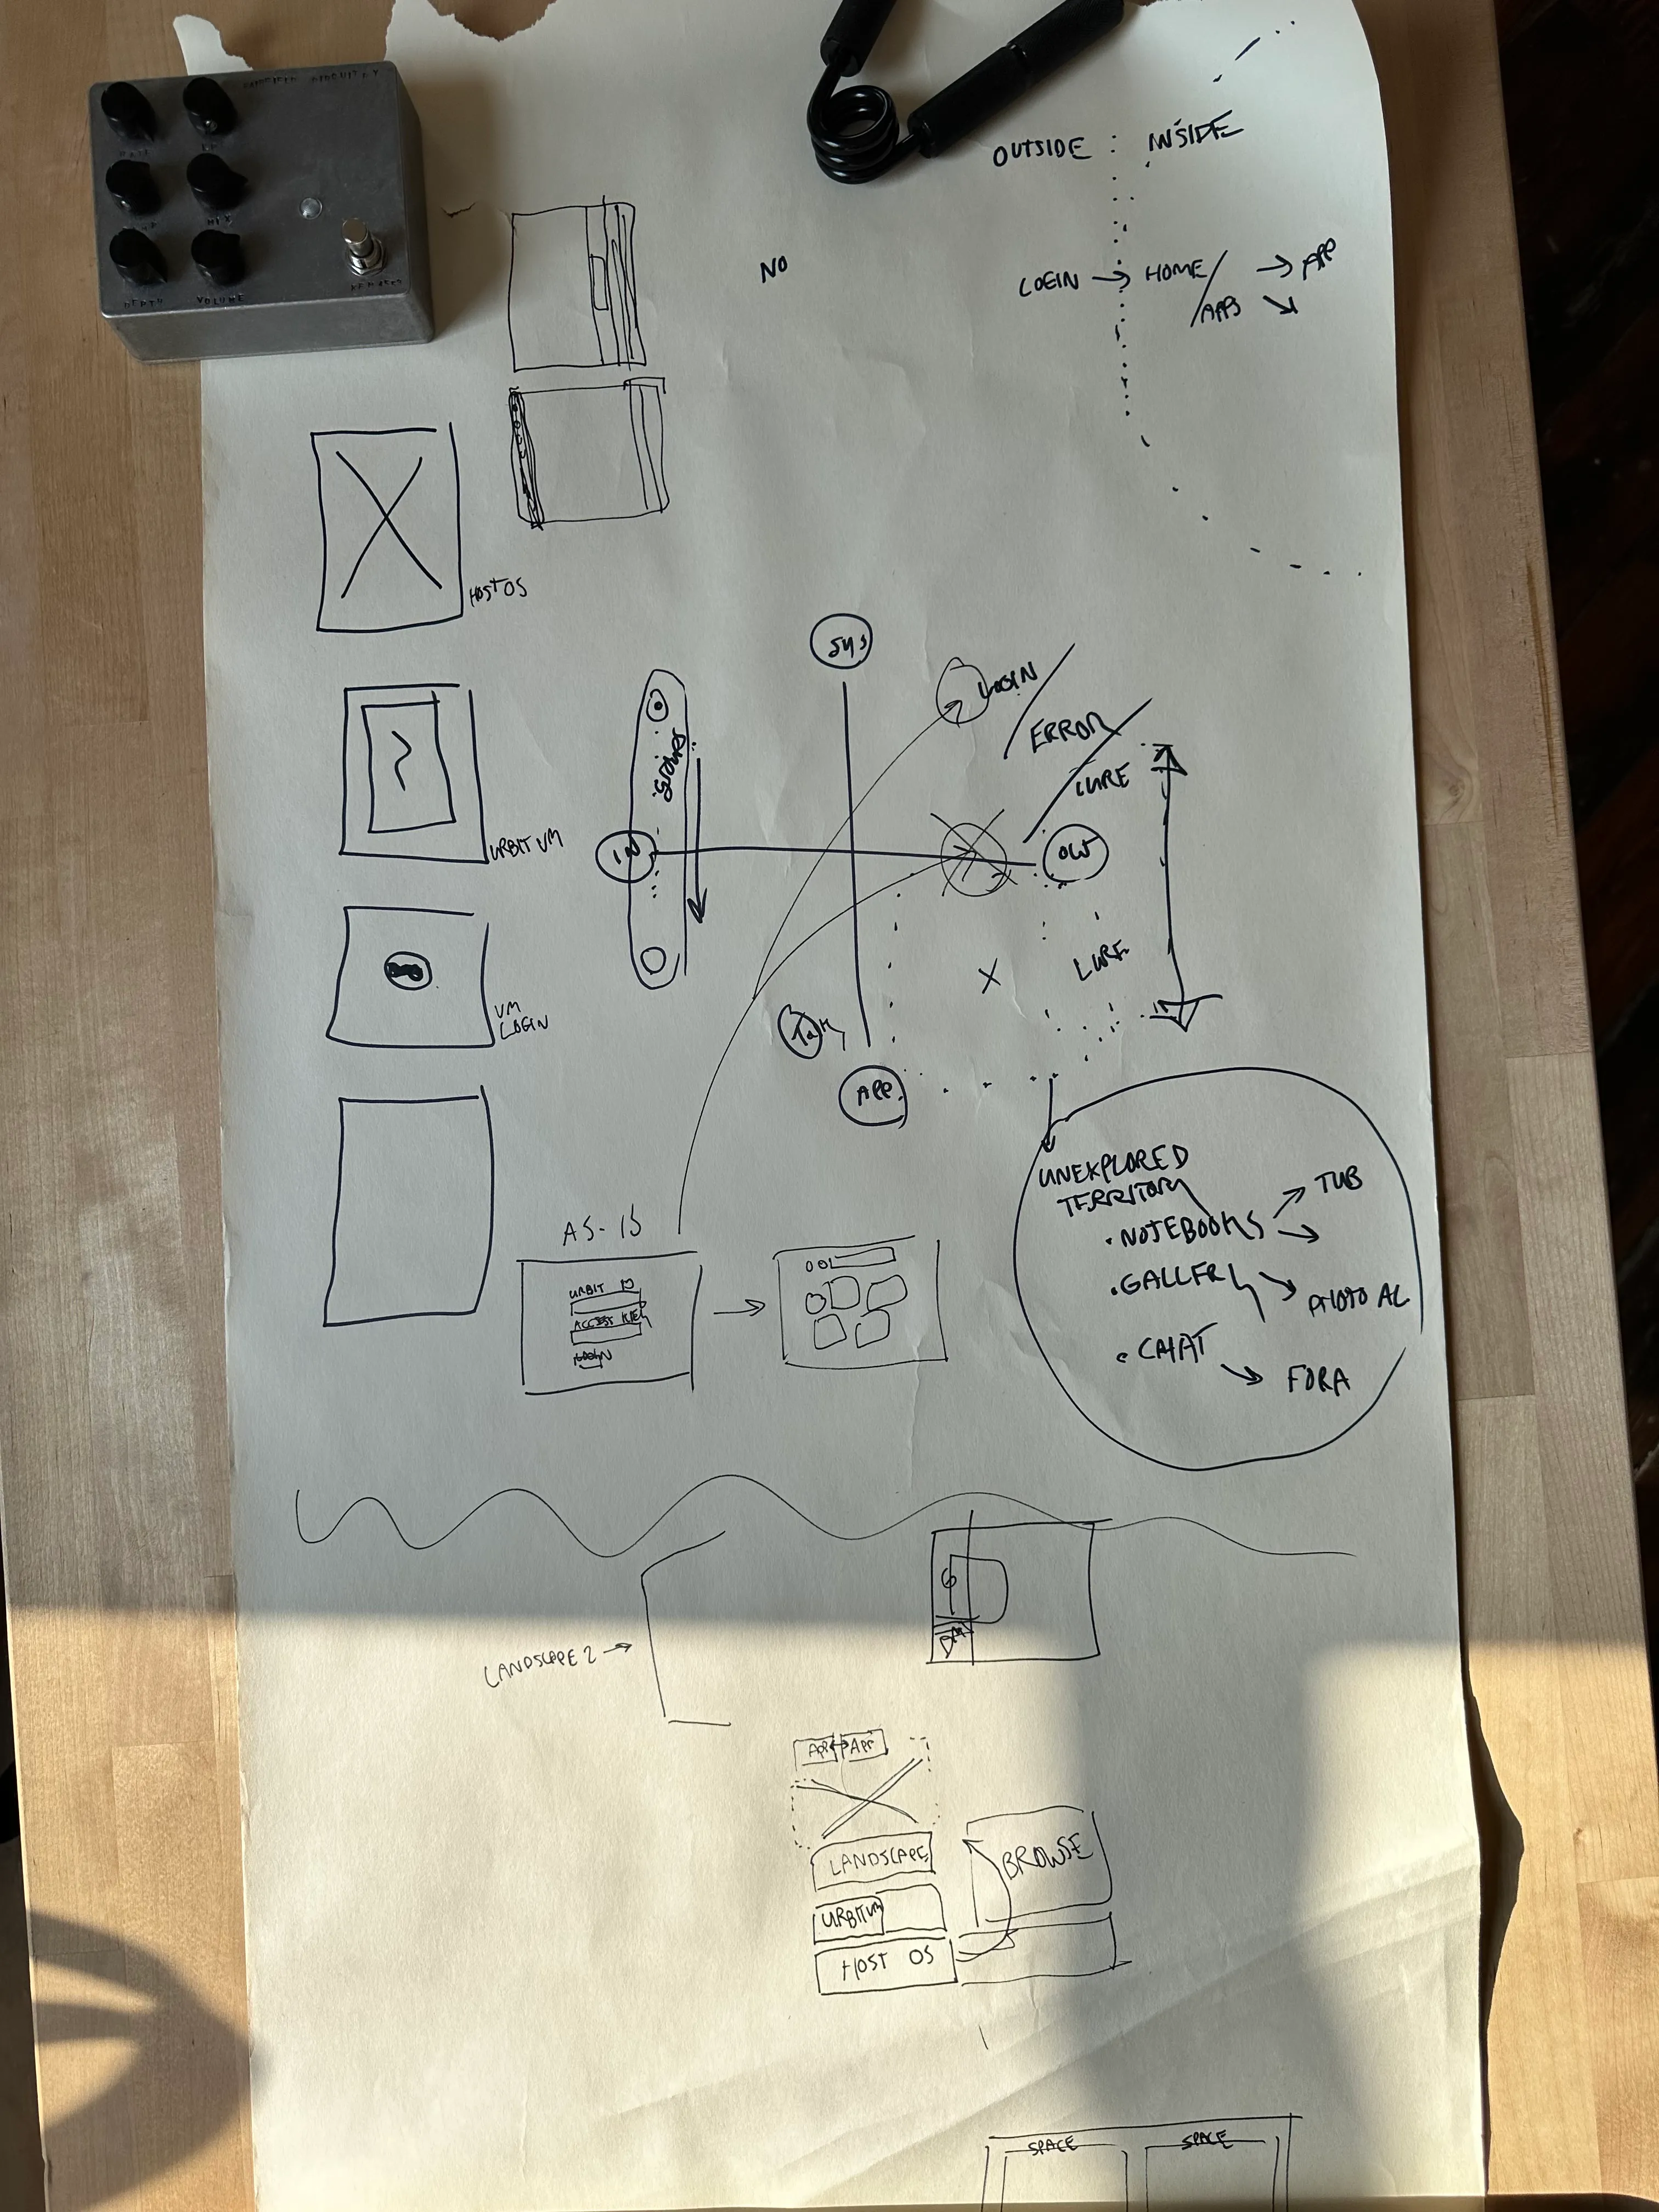 A roll of butcher paper weighed down with a guitar pedal and a 200lb grip exerciser. A sketch on the butcher paper outlines some sketching of the I/O model of Surface and how far it would hew into being a 'surface level app' vs. a 'system interface'